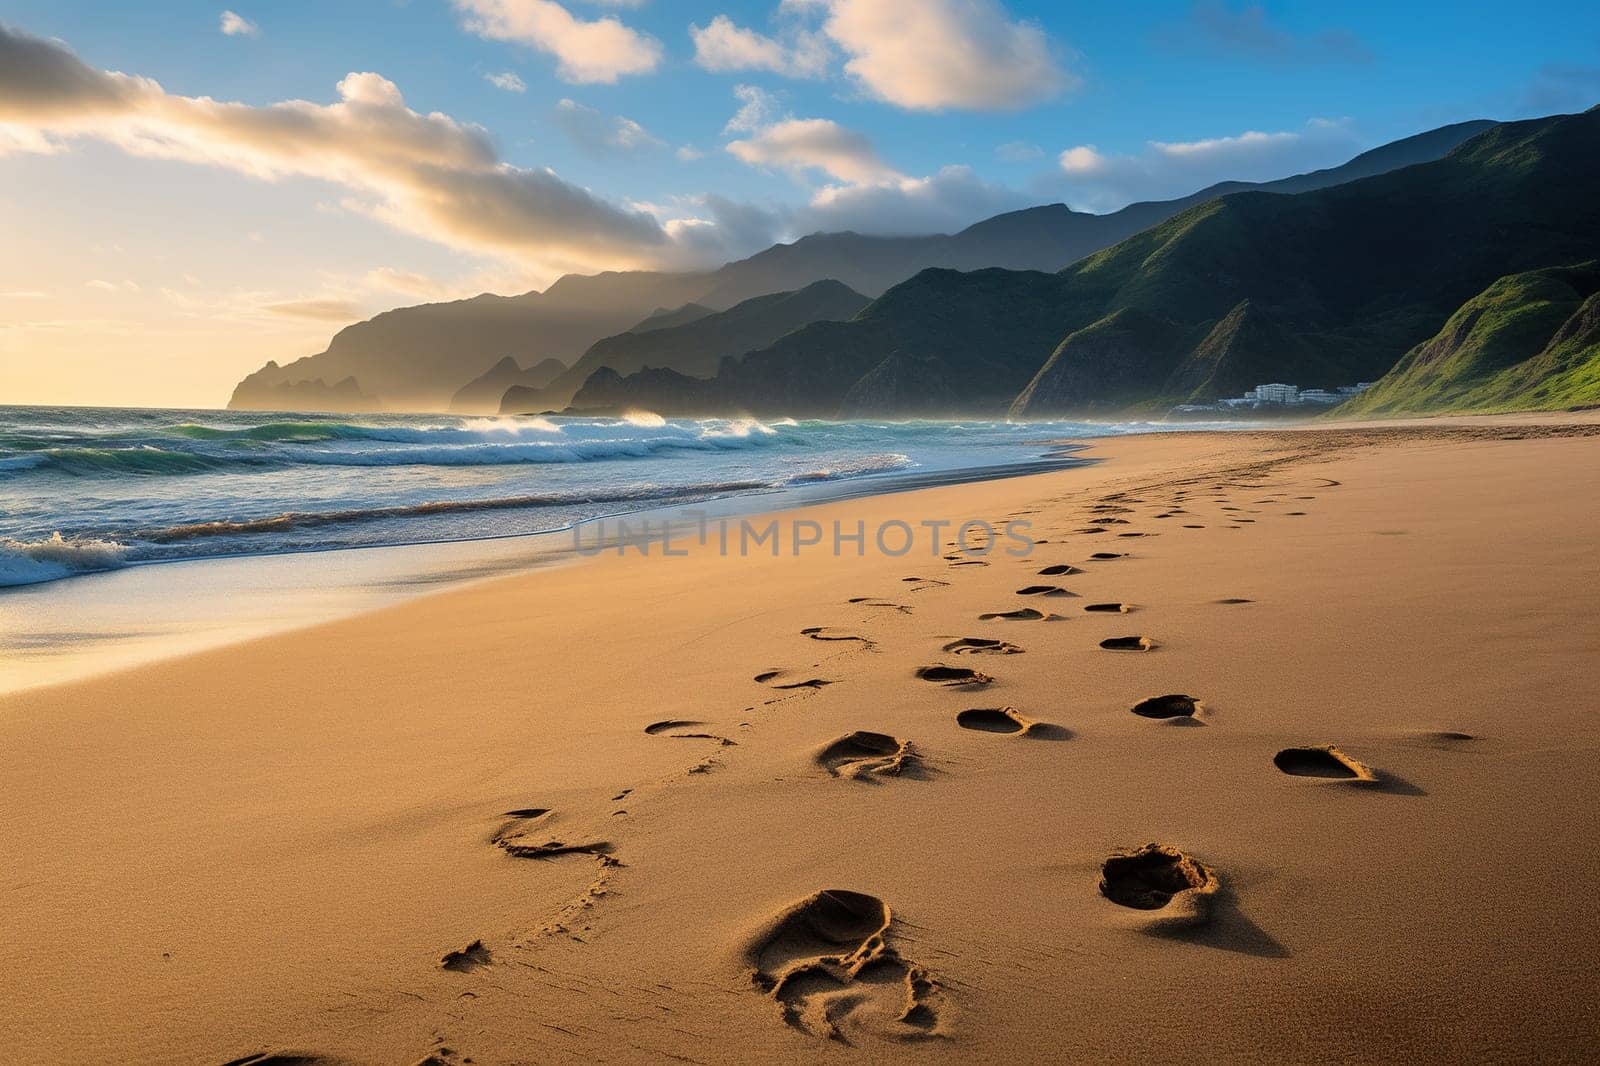 Footprints in the sand along the seashore near the mountains. Vacation concept.